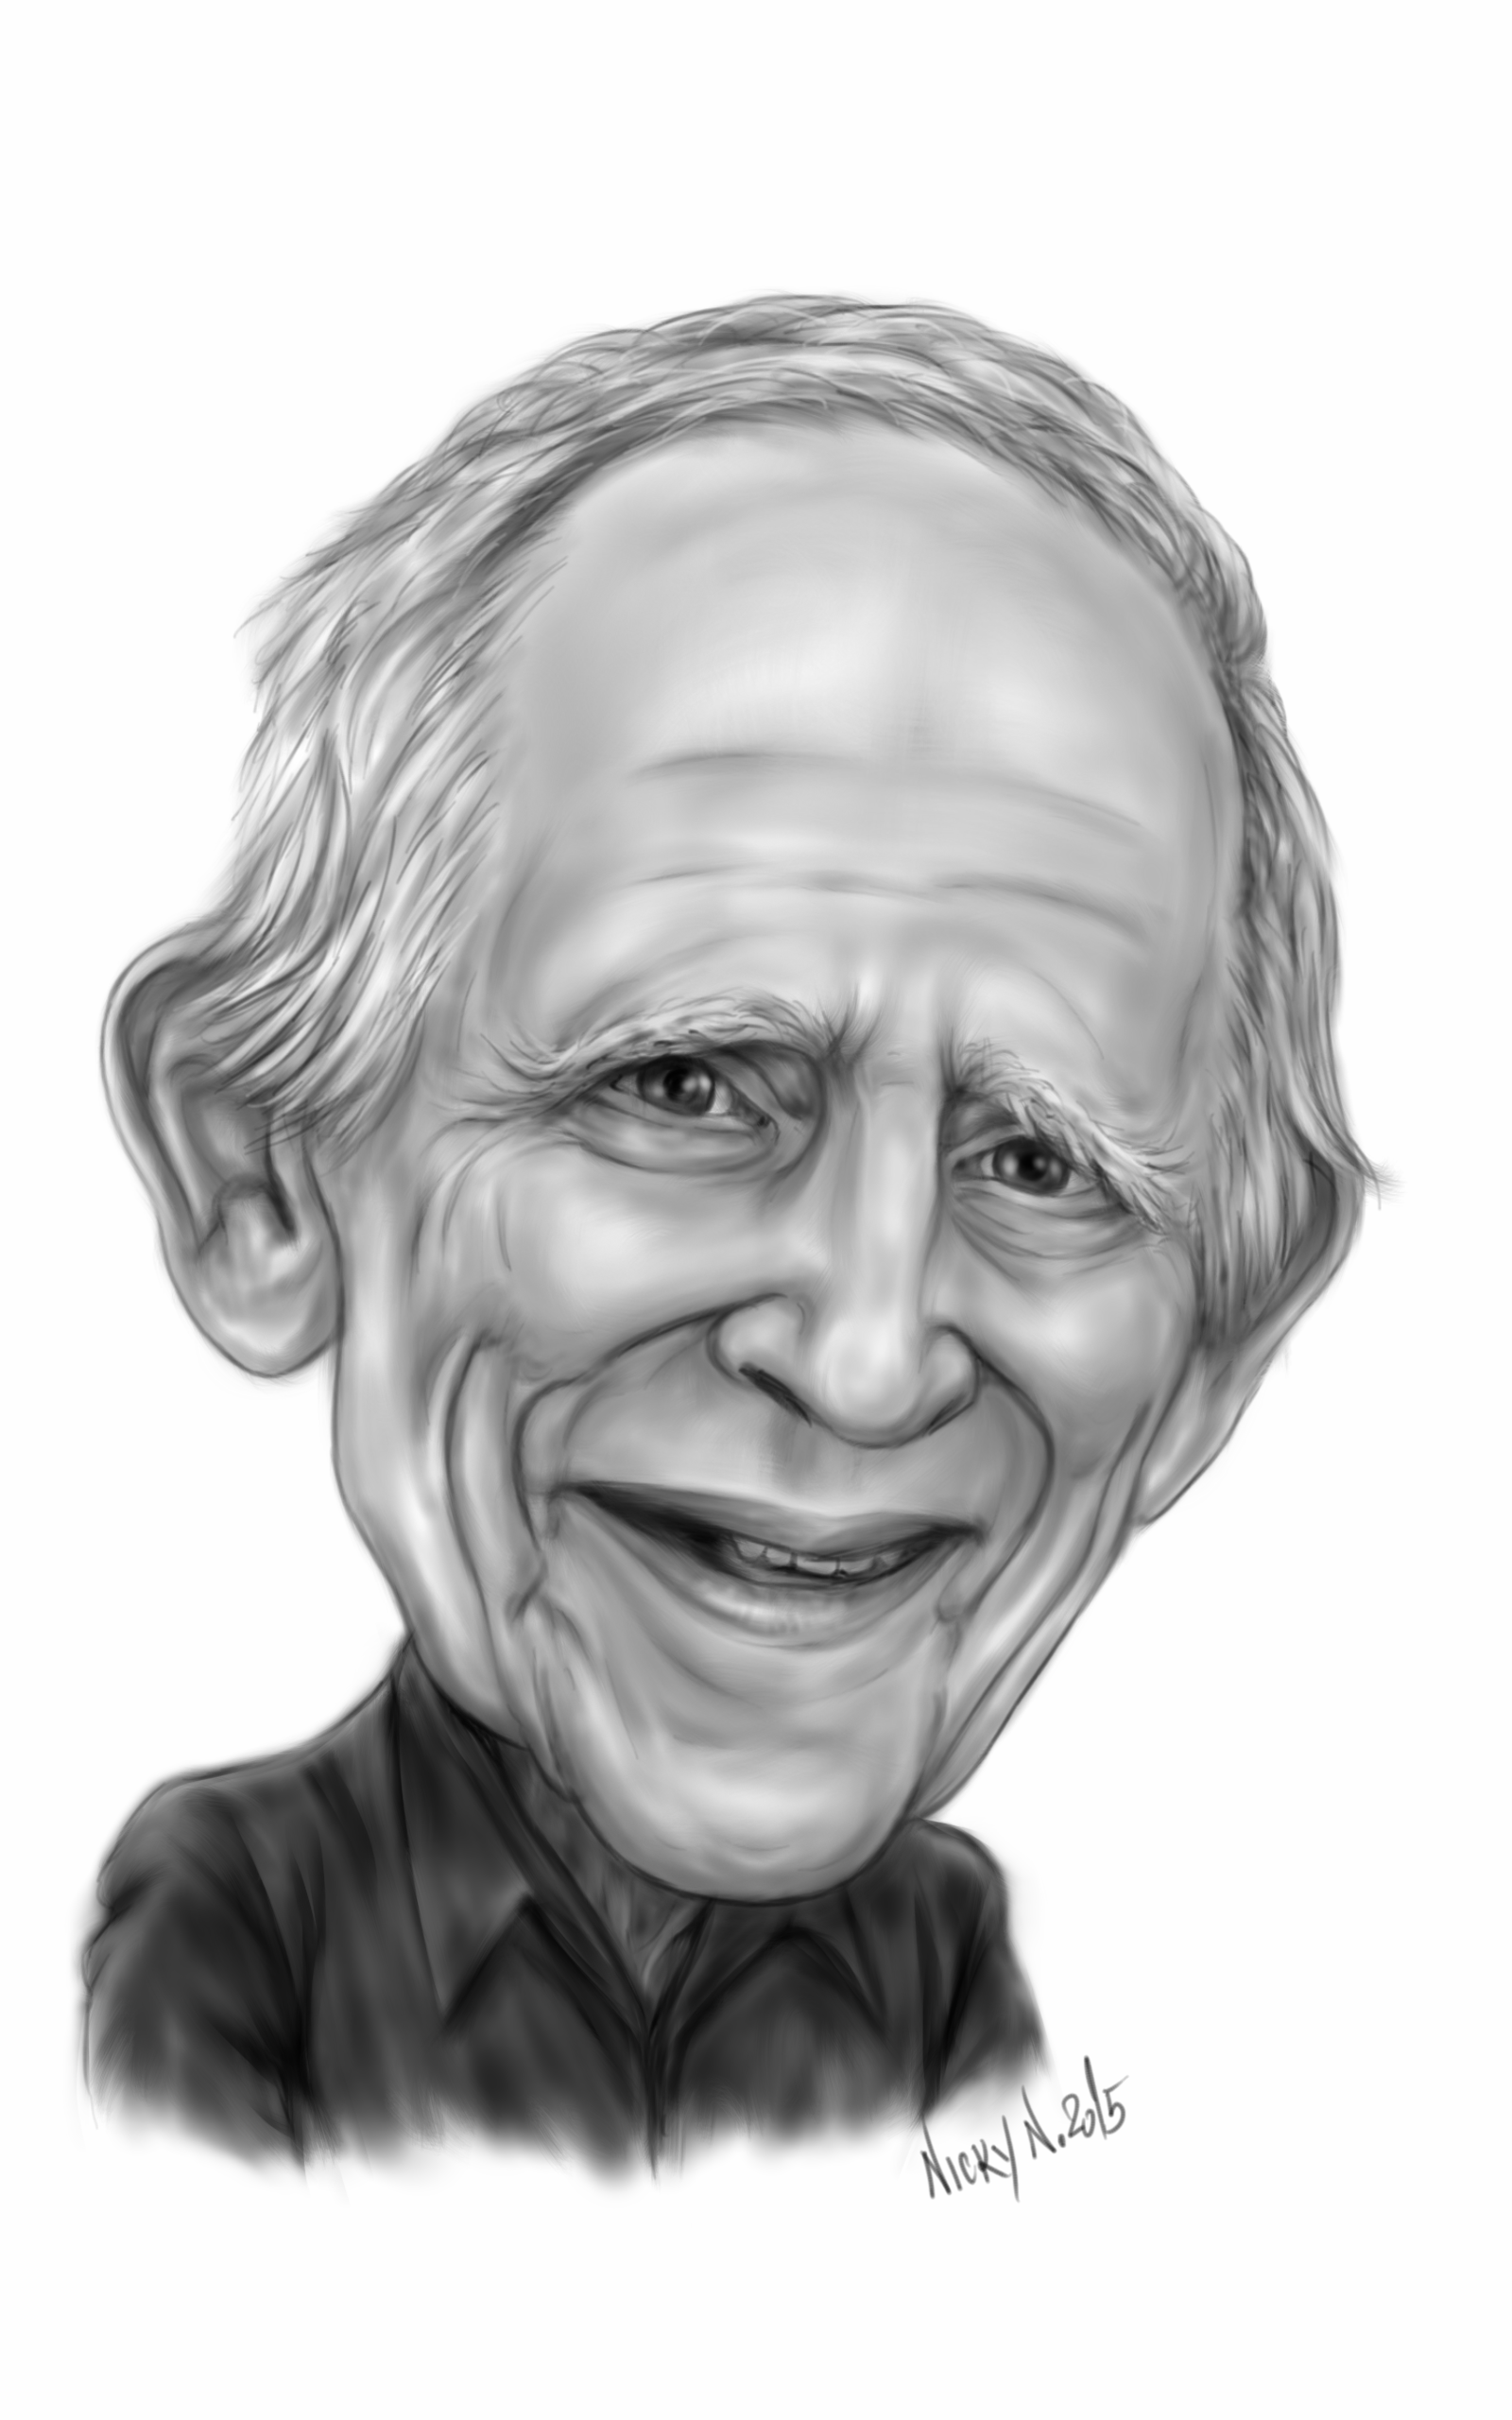 I Will Draw a Professional Caricature from your Photo for $10 - ListingDock